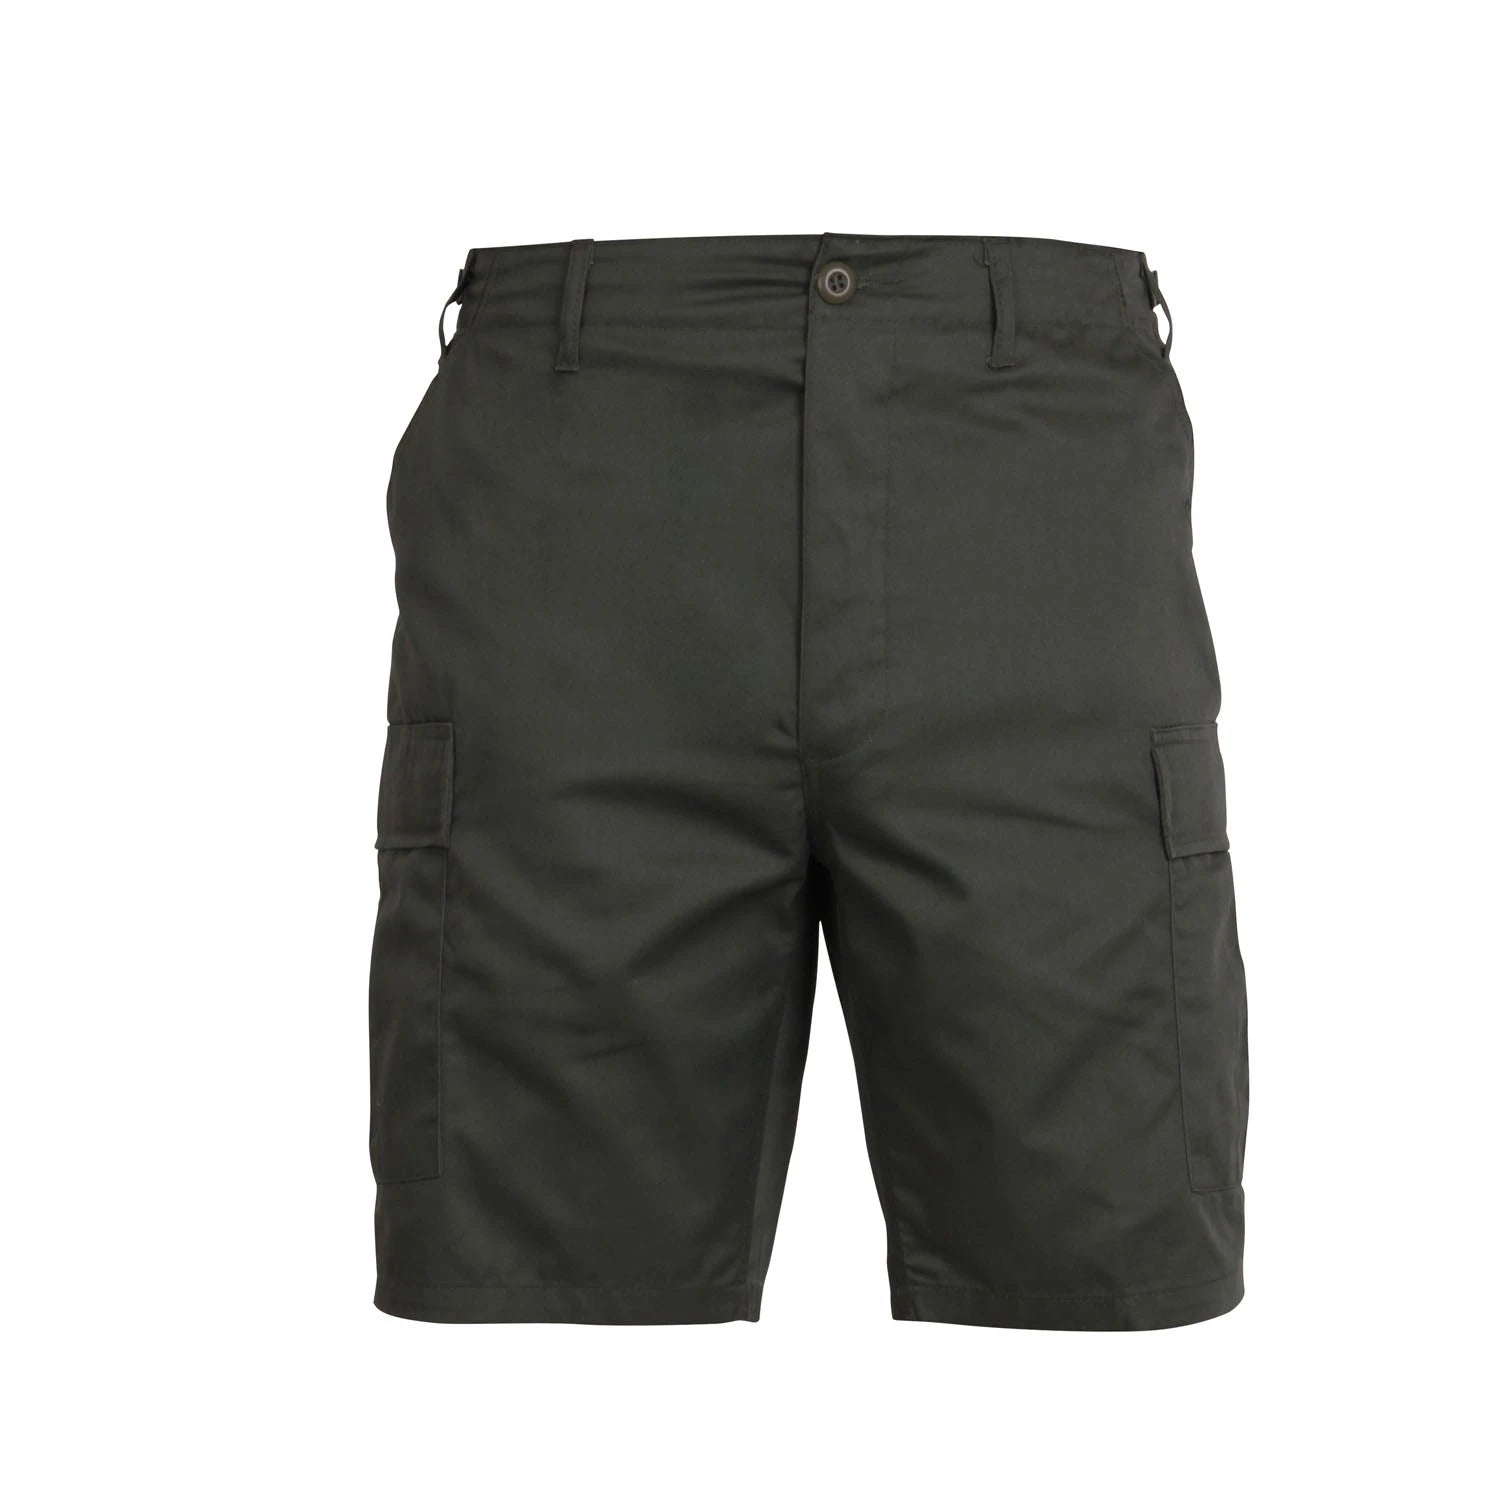 BDU Shorts - Olive Drab Poly/Cotton – Army Navy Marine Store